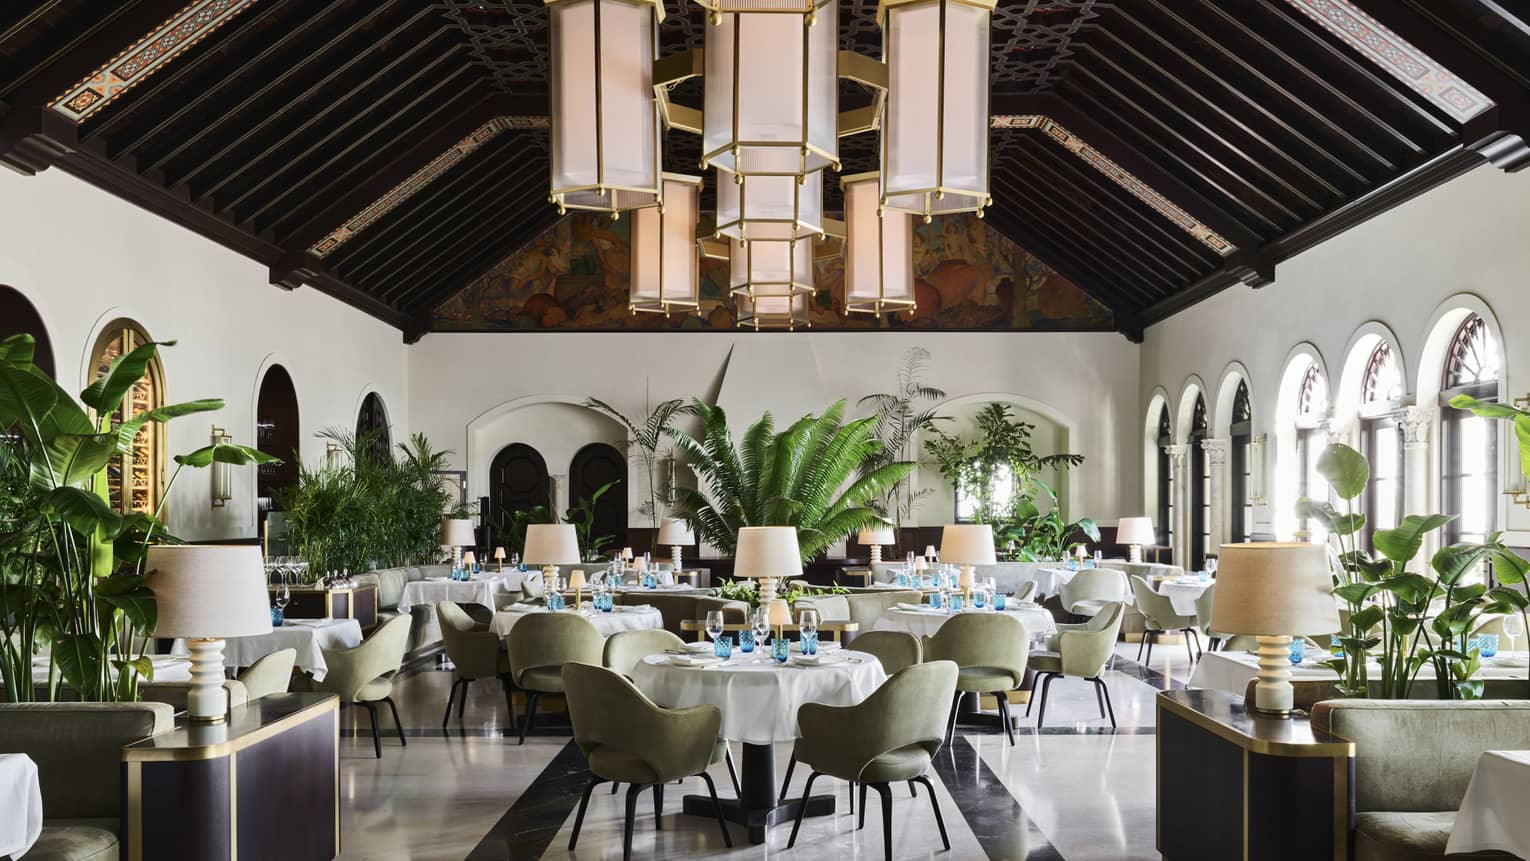 The light-filled Lido Restaurant with white walls, windows, dark wooden beams on a pitched ceiling and hanging lantern-style lights. One of the many Surfside restaurants of note at Four Seasons Surf Club, Florida.